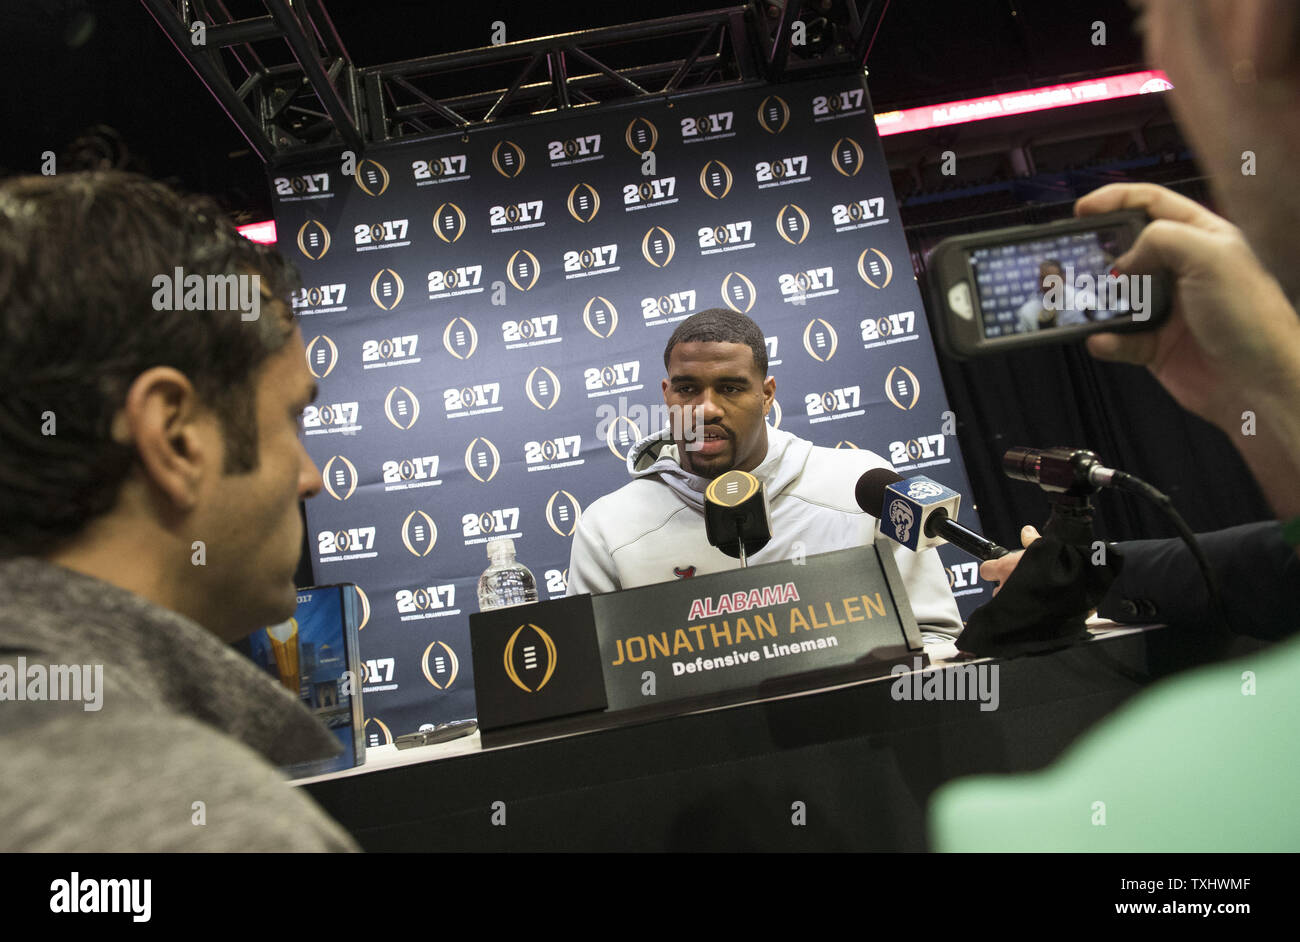 Alabama Crimson Tide Defensive Lineman Jonathan Allen talks to reporters on media day prior to the NCAA Football National Championship, in Tampa, Florida on January 7, 2017. Alabama will take on the Clemson Tigers in the College Football National Championship on Monday. Photo by Kevin Dietsch/UPI Stock Photo